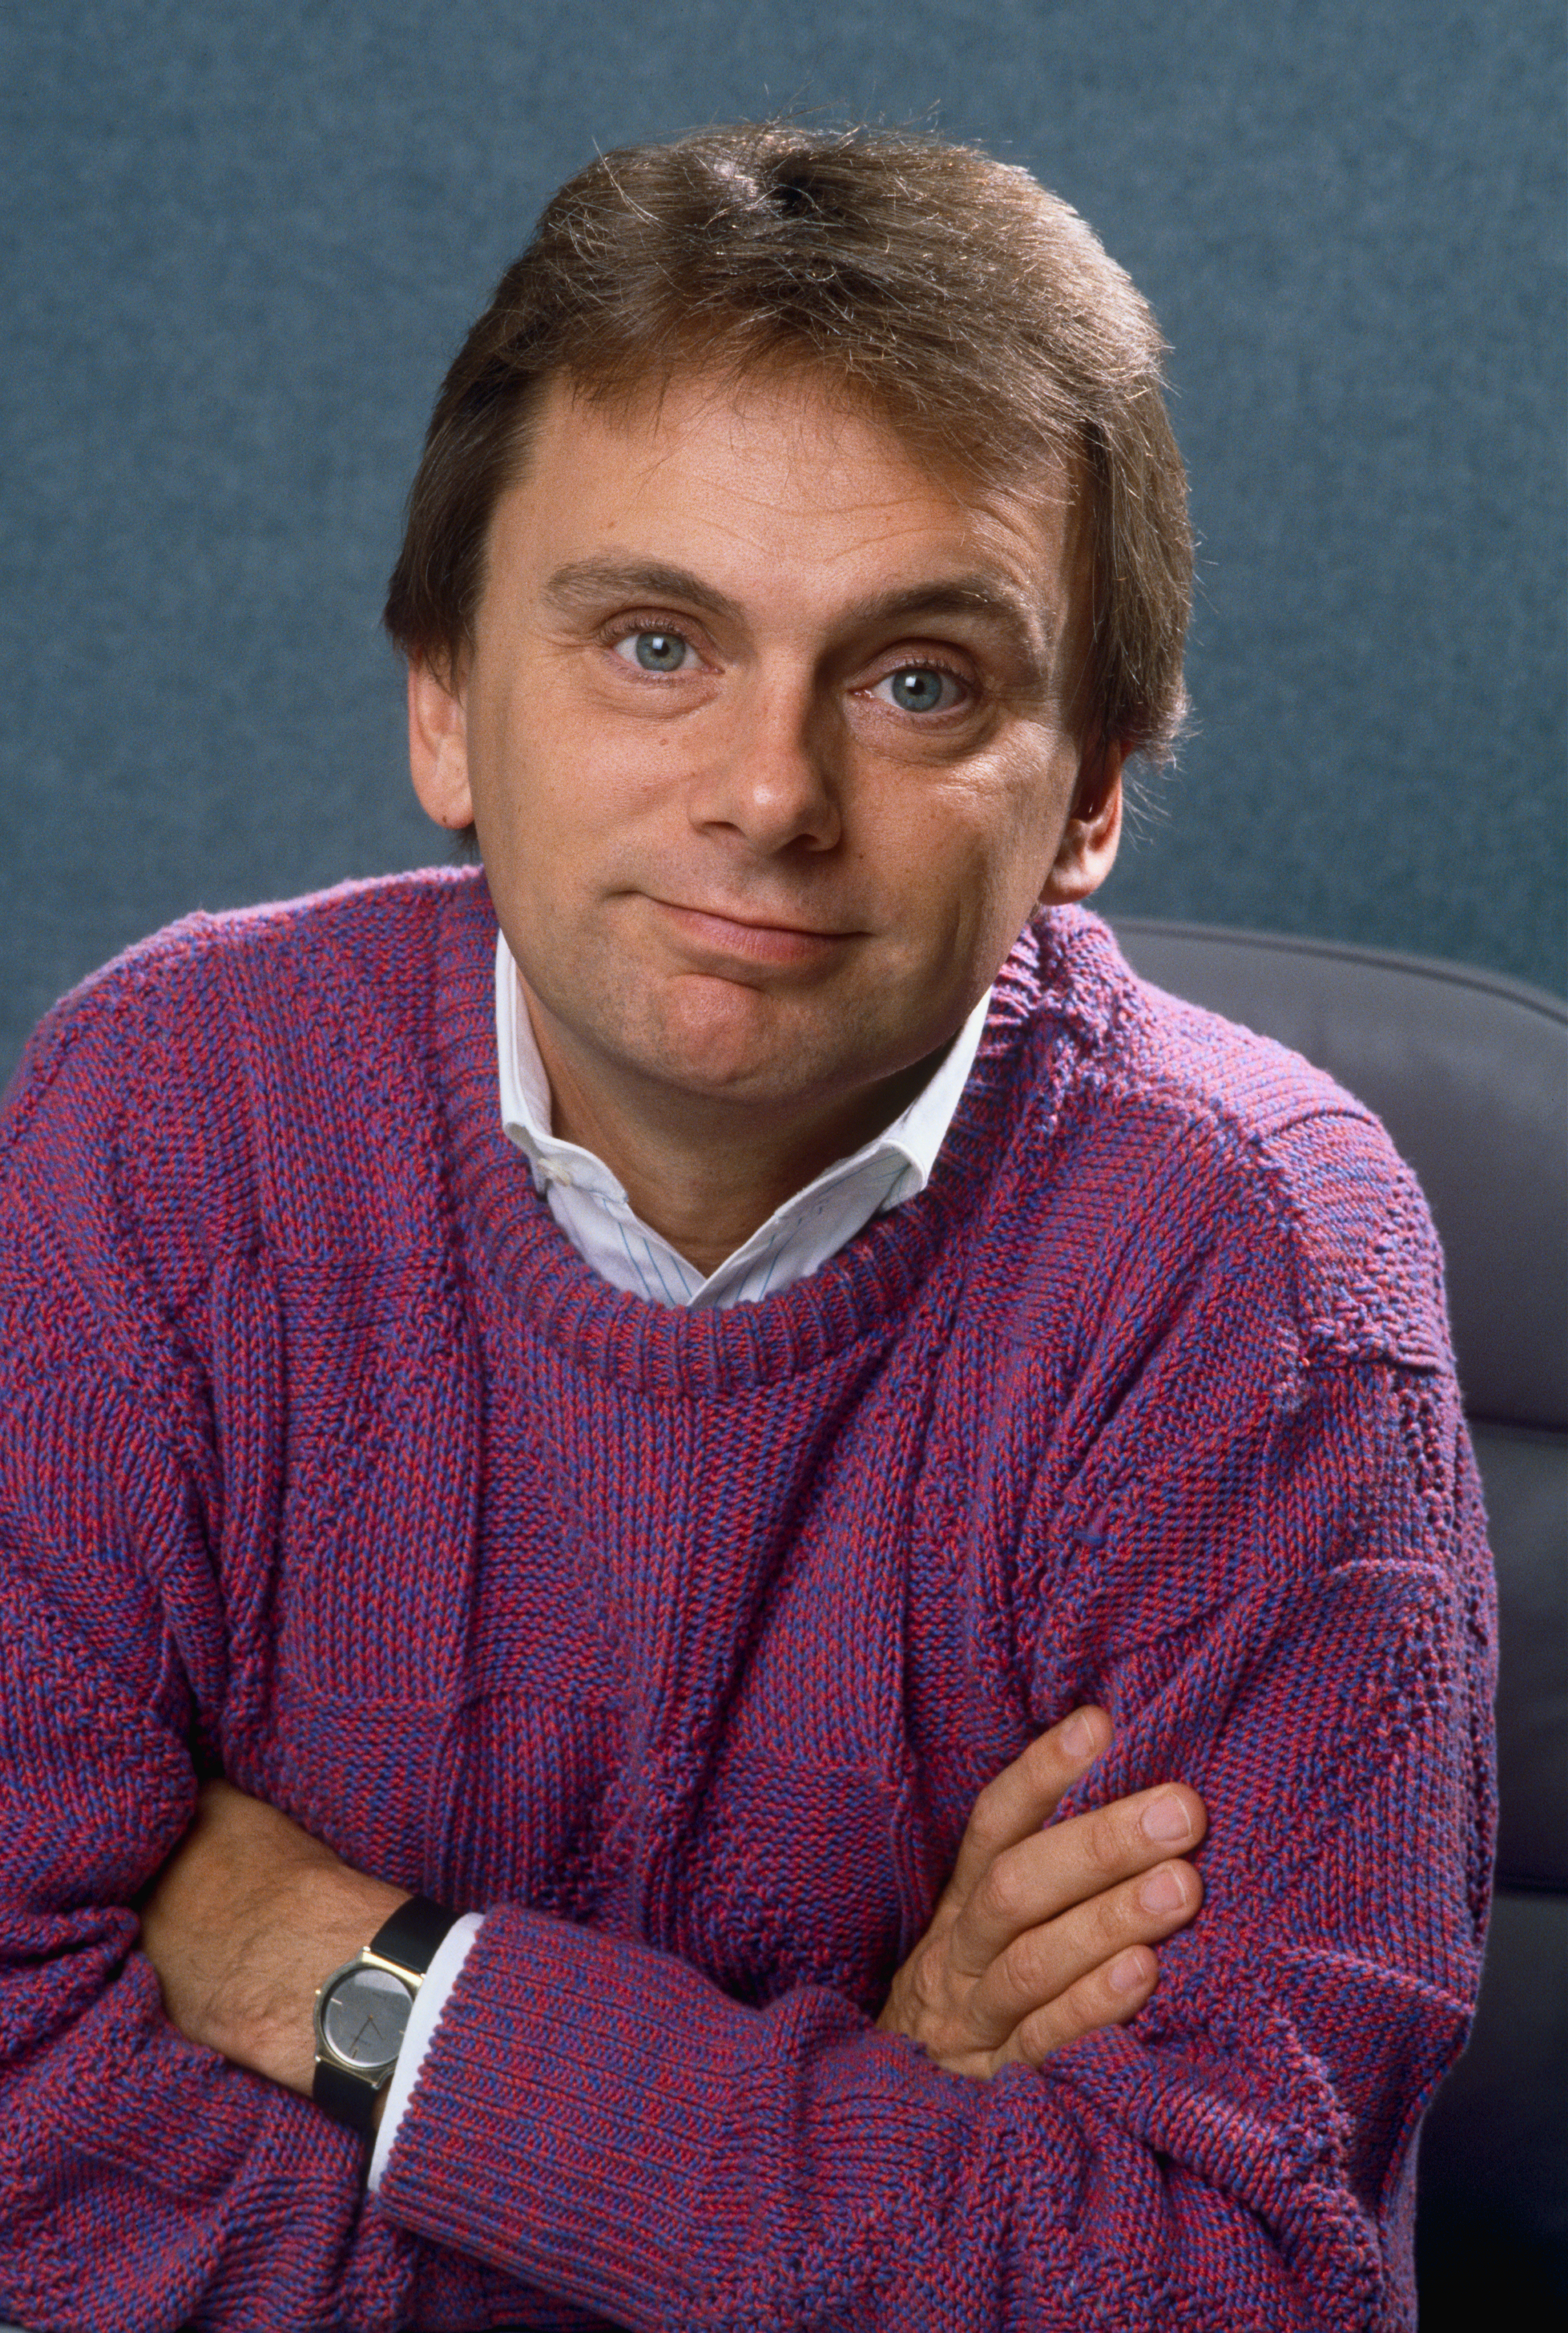 Pat Sajak in a portrait in Los Angeles, California, 1989 | Source: Getty Images